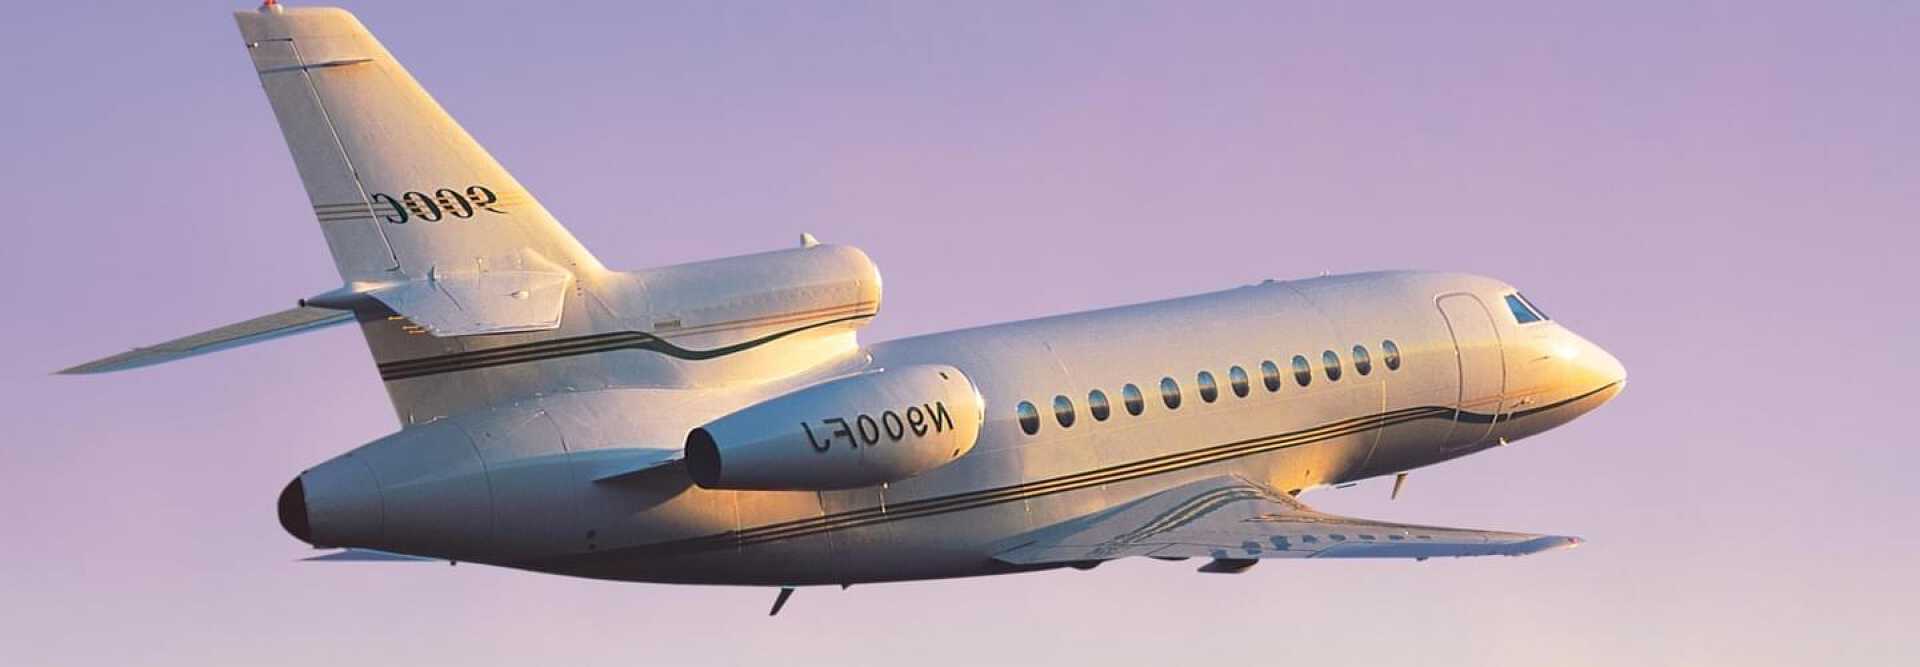 Super Large Business Jet Dassault Falcon 900C to charter for private aviation flights with LunaJets, intercontinental capabilities, performance